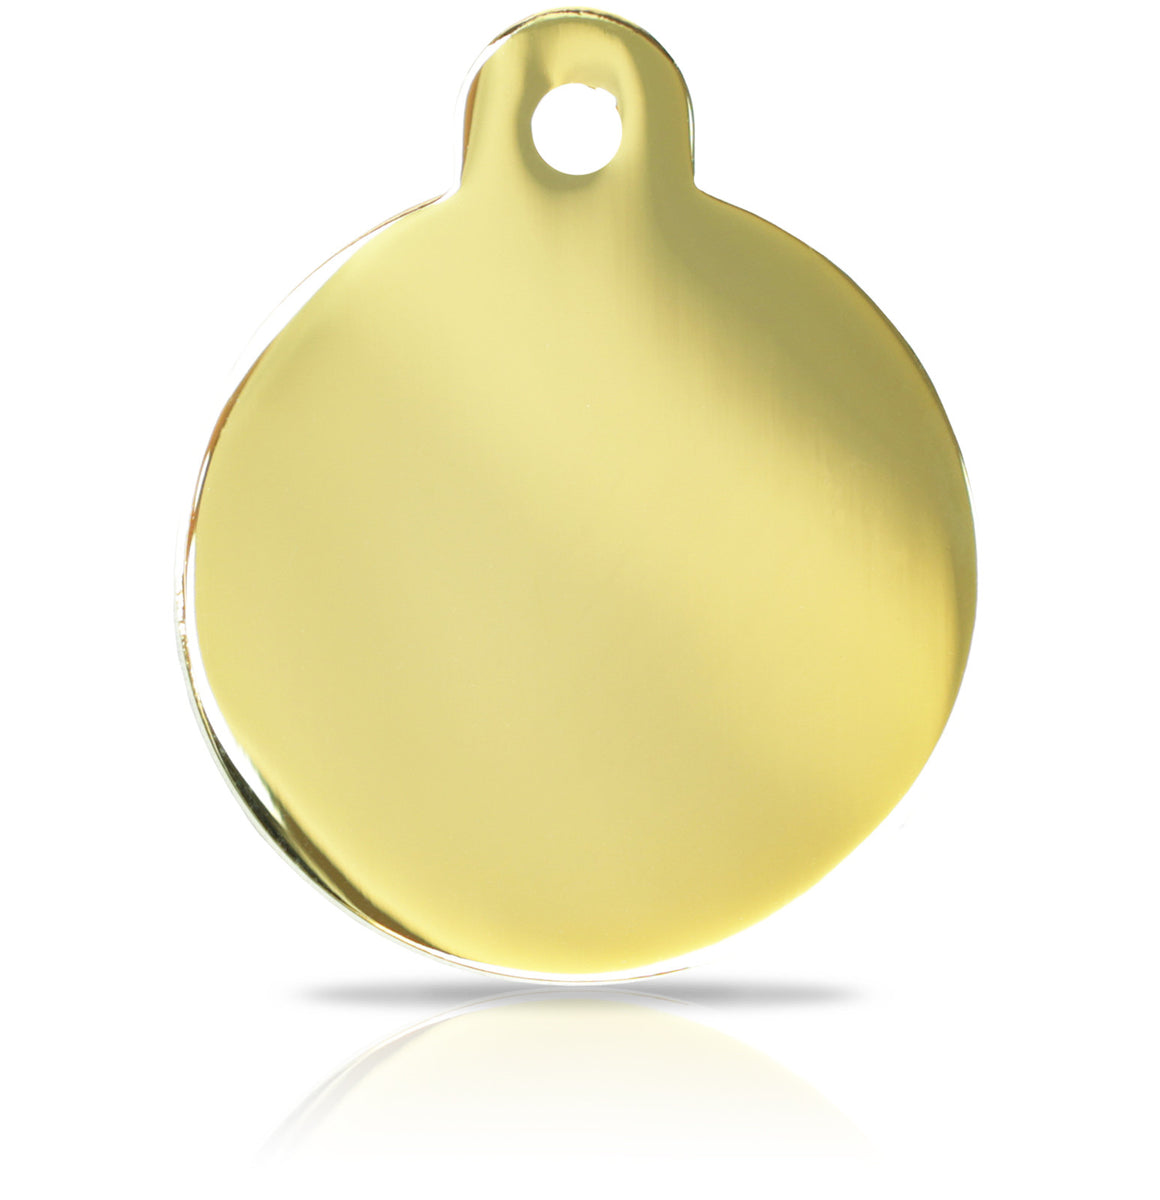 TaggIT Engraving Prestige Large Disc Gold iMarc Pet ID Tag